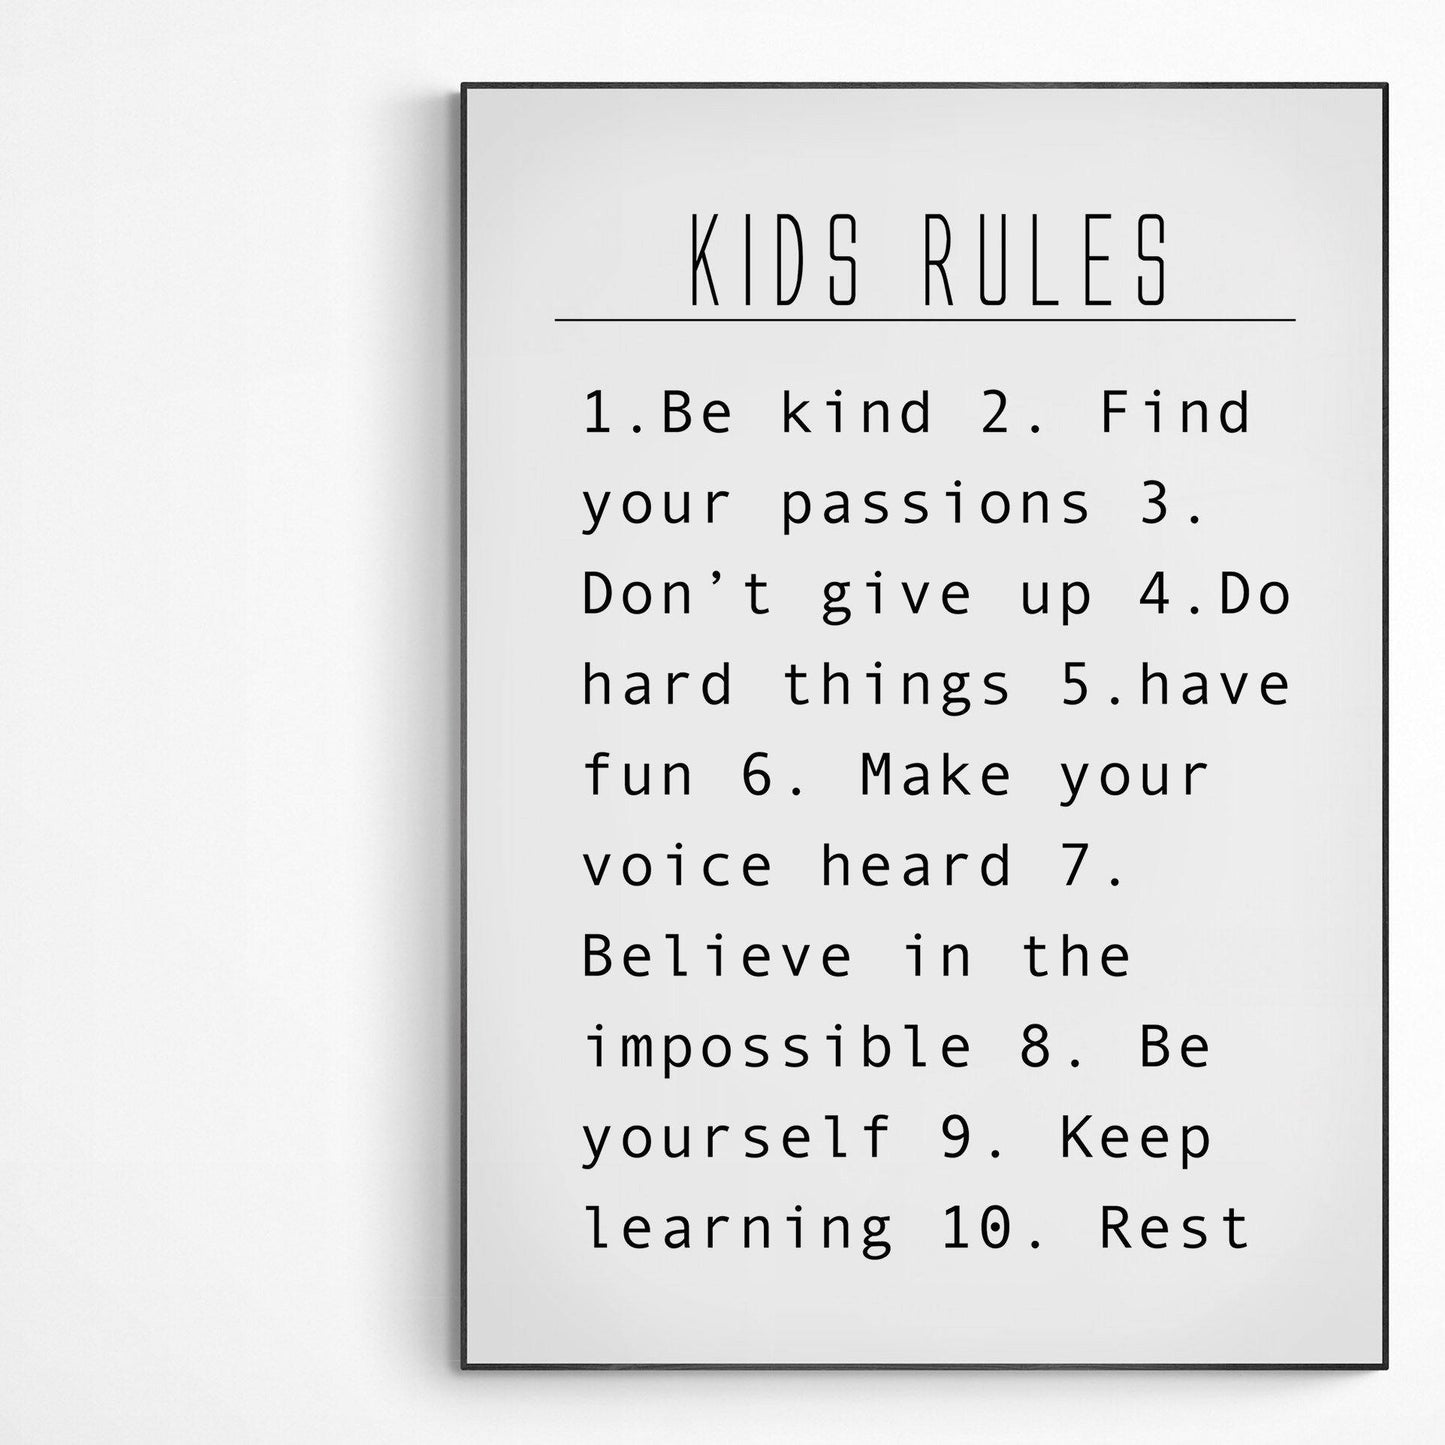 KIDS RULES Print | Original Poster Art | Fun Print Quote | Motivational Poster Wall Art Decor | Greeting Card Gifts | Variety Sizes